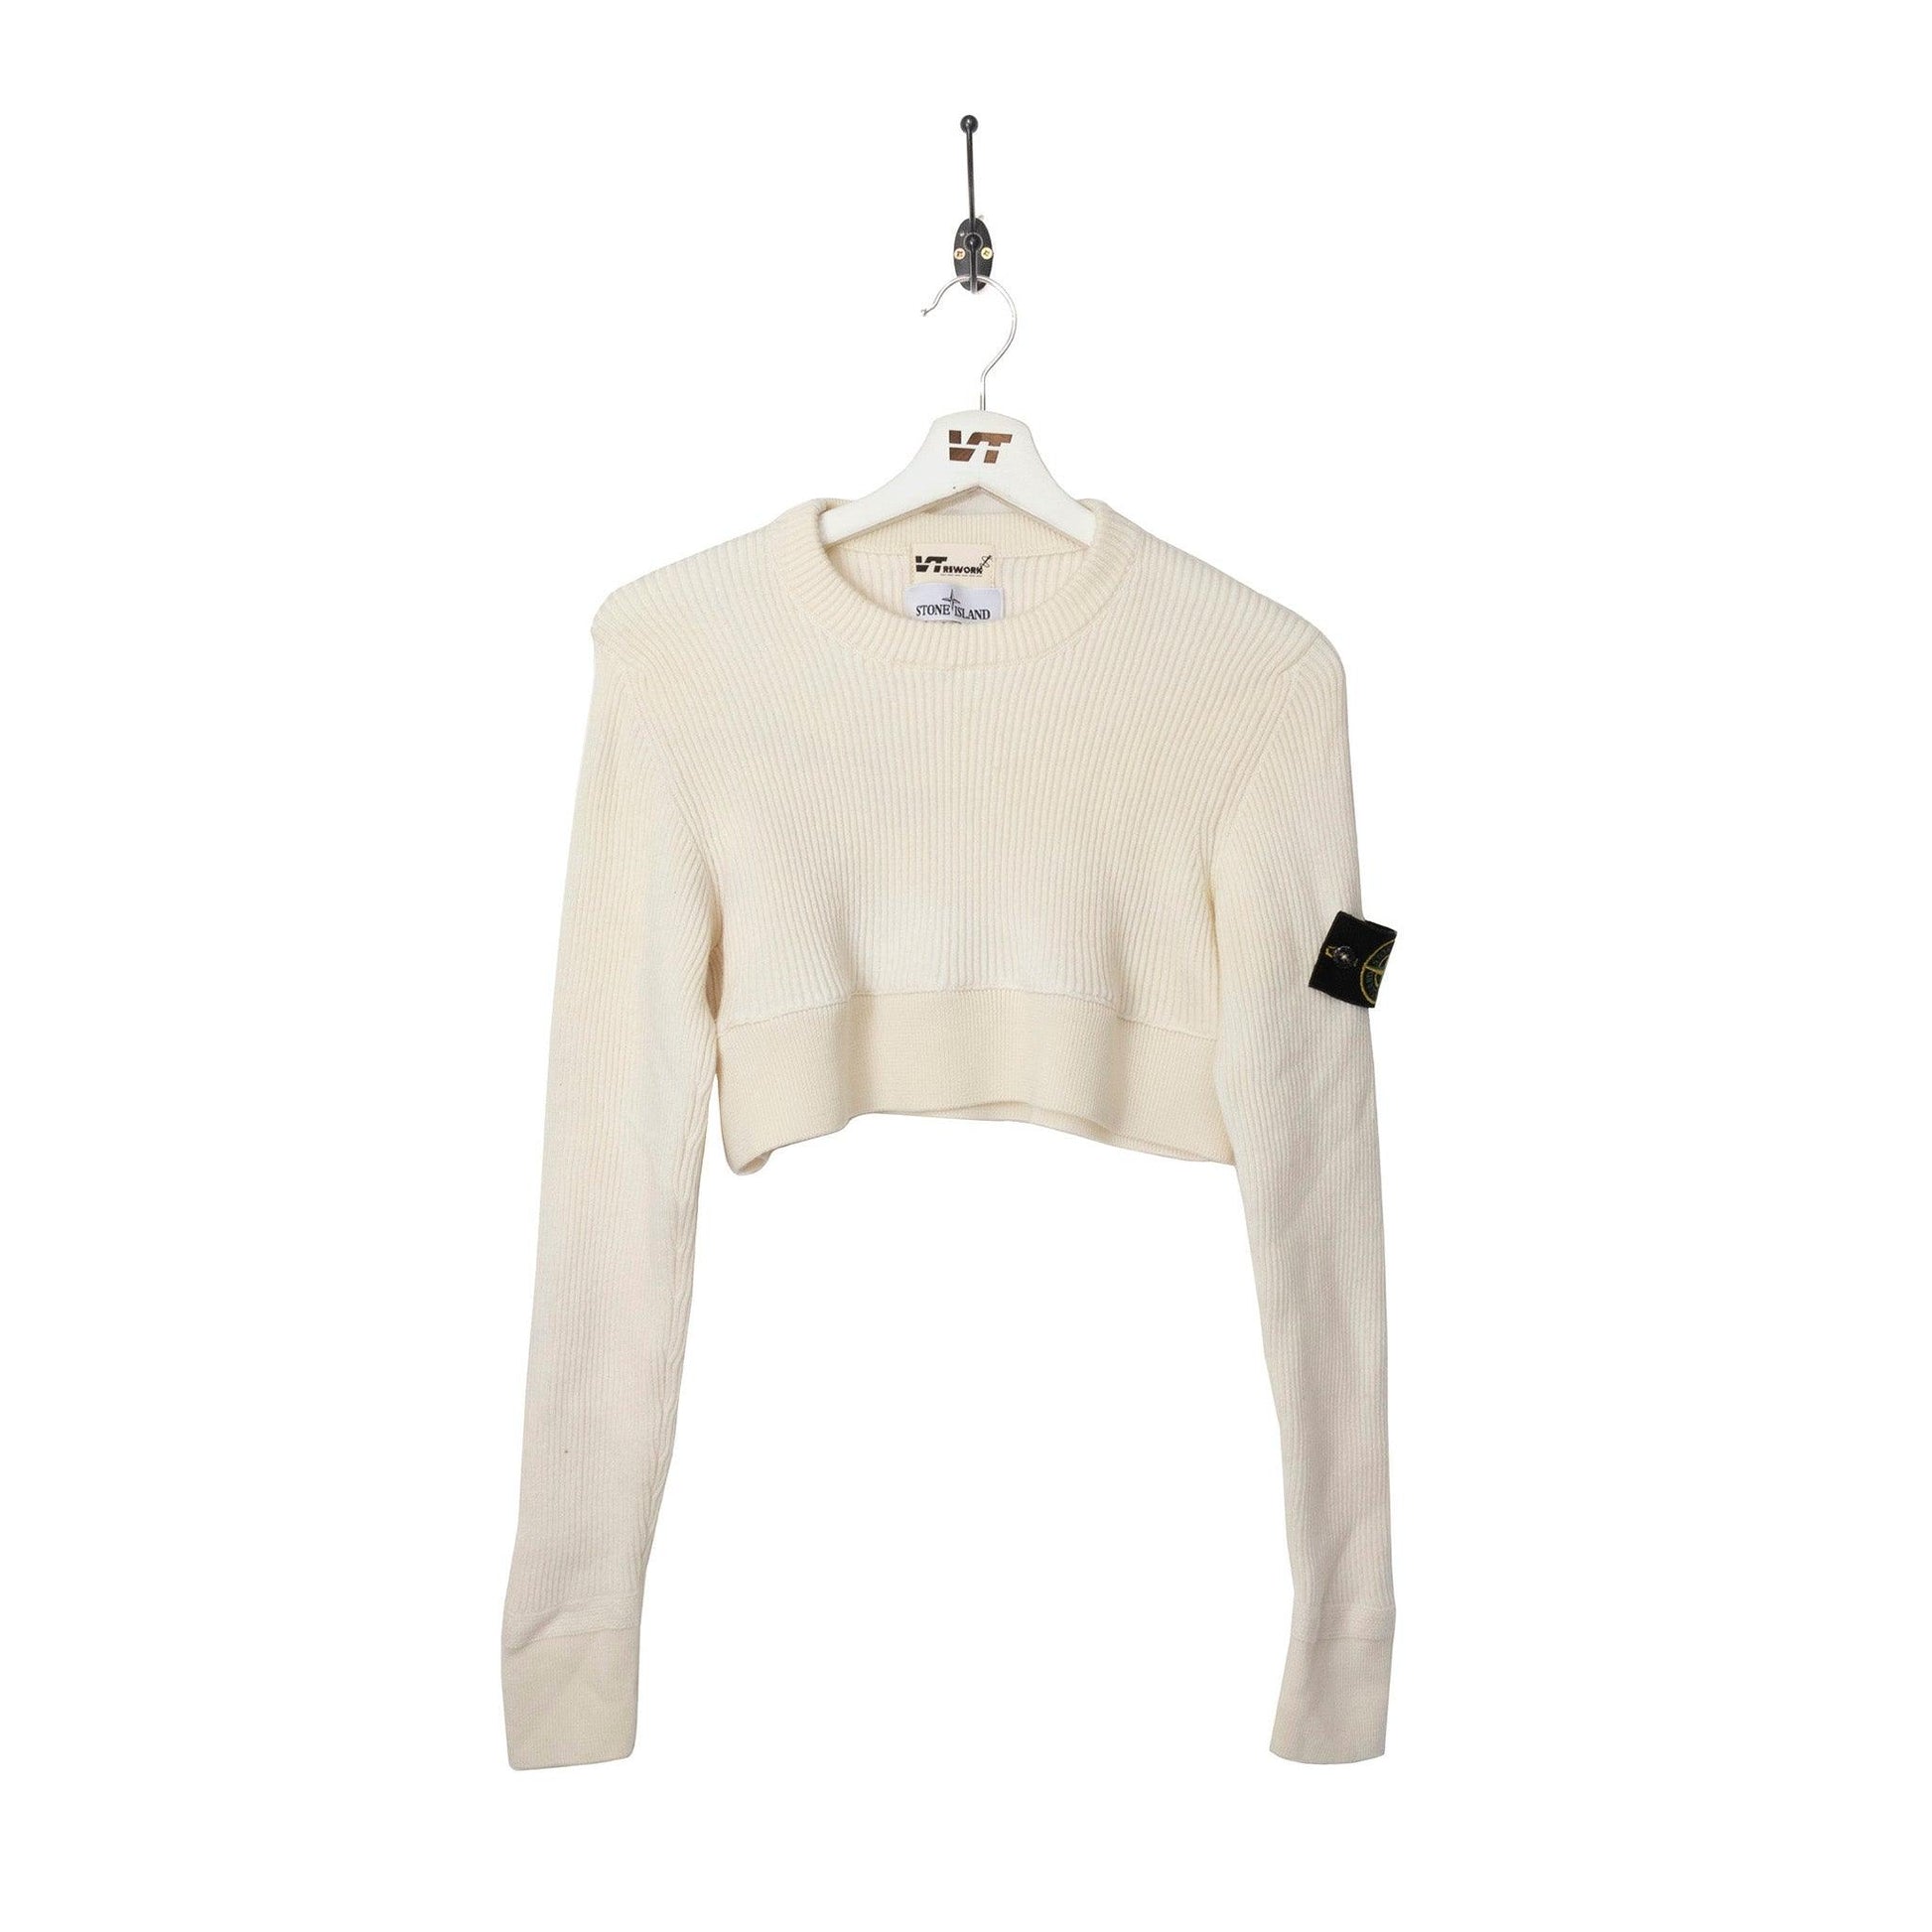 VT Rework : Stone Island Cropped Knit Sweater - Known Source